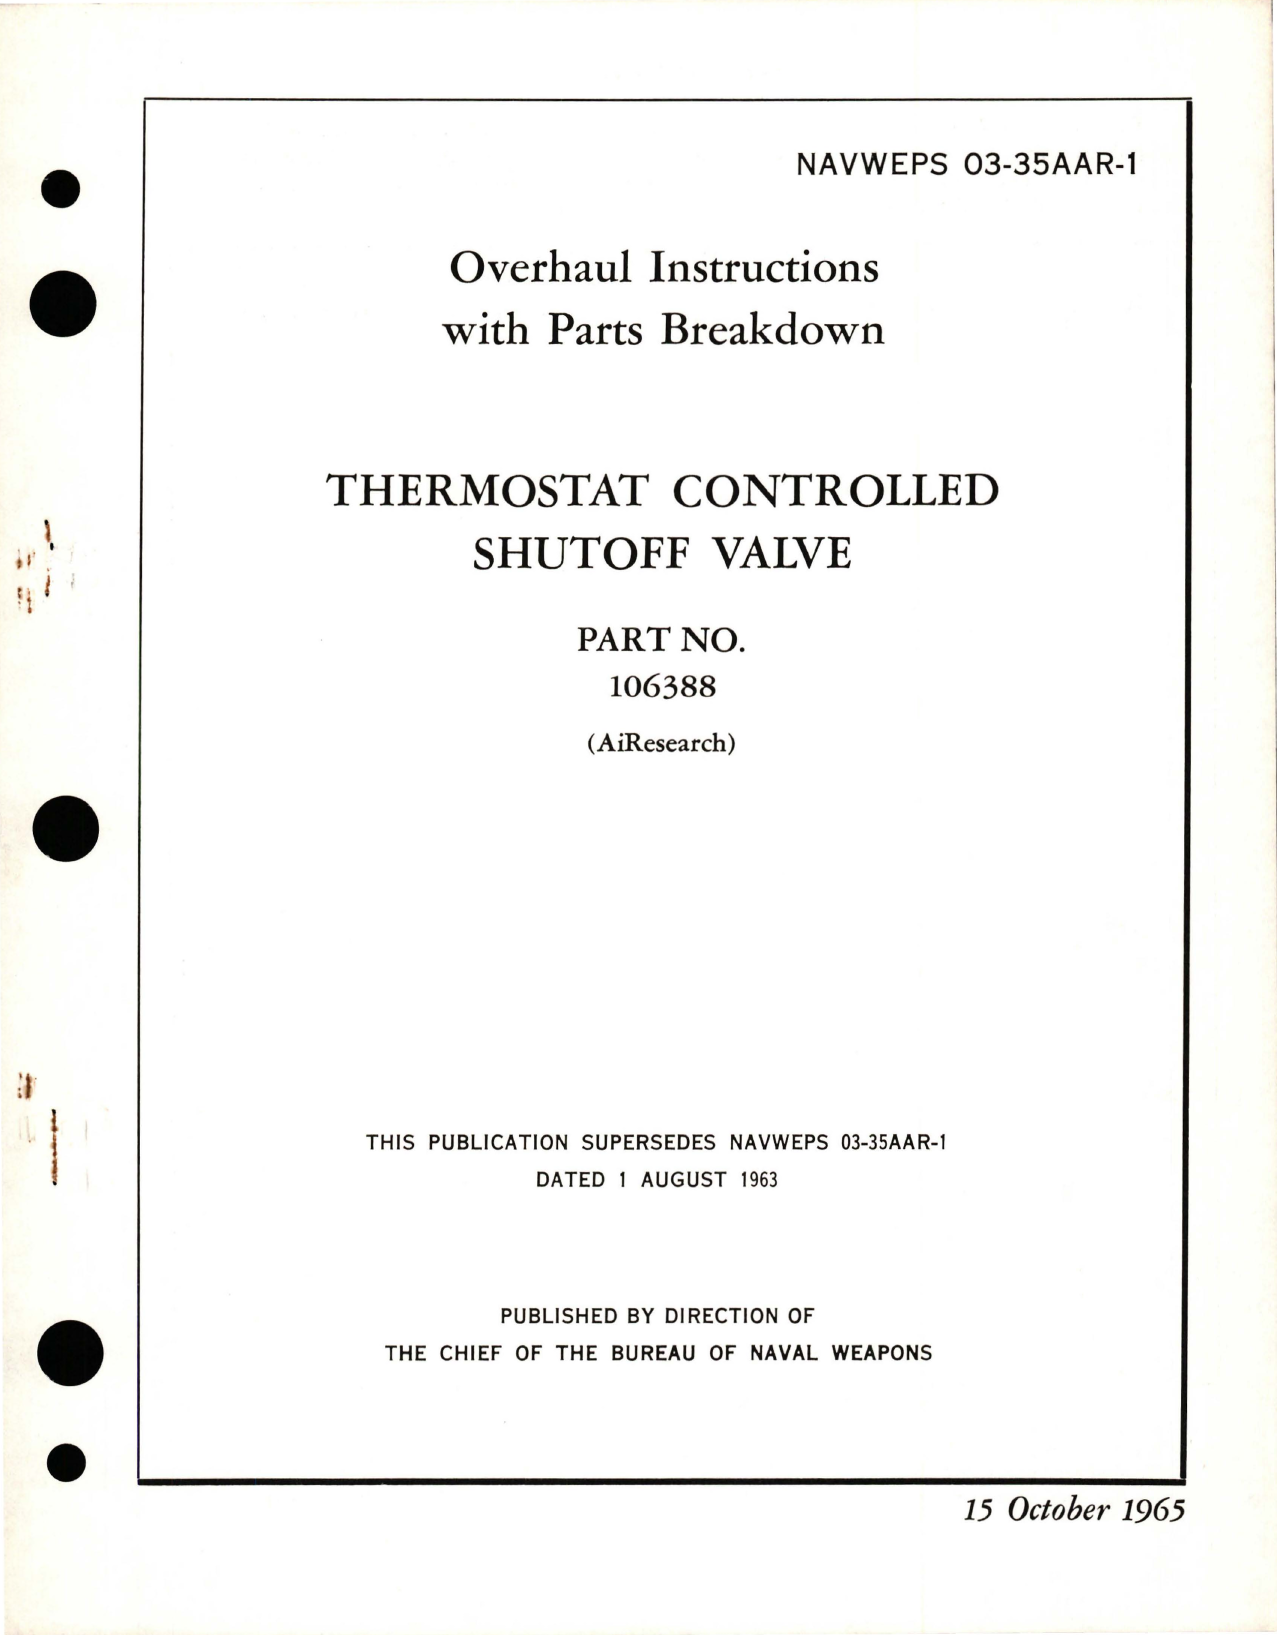 Sample page 1 from AirCorps Library document: Overhaul Instructions with Parts Breakdown for Thermostat Controlled Shutoff Valve - Part 106388